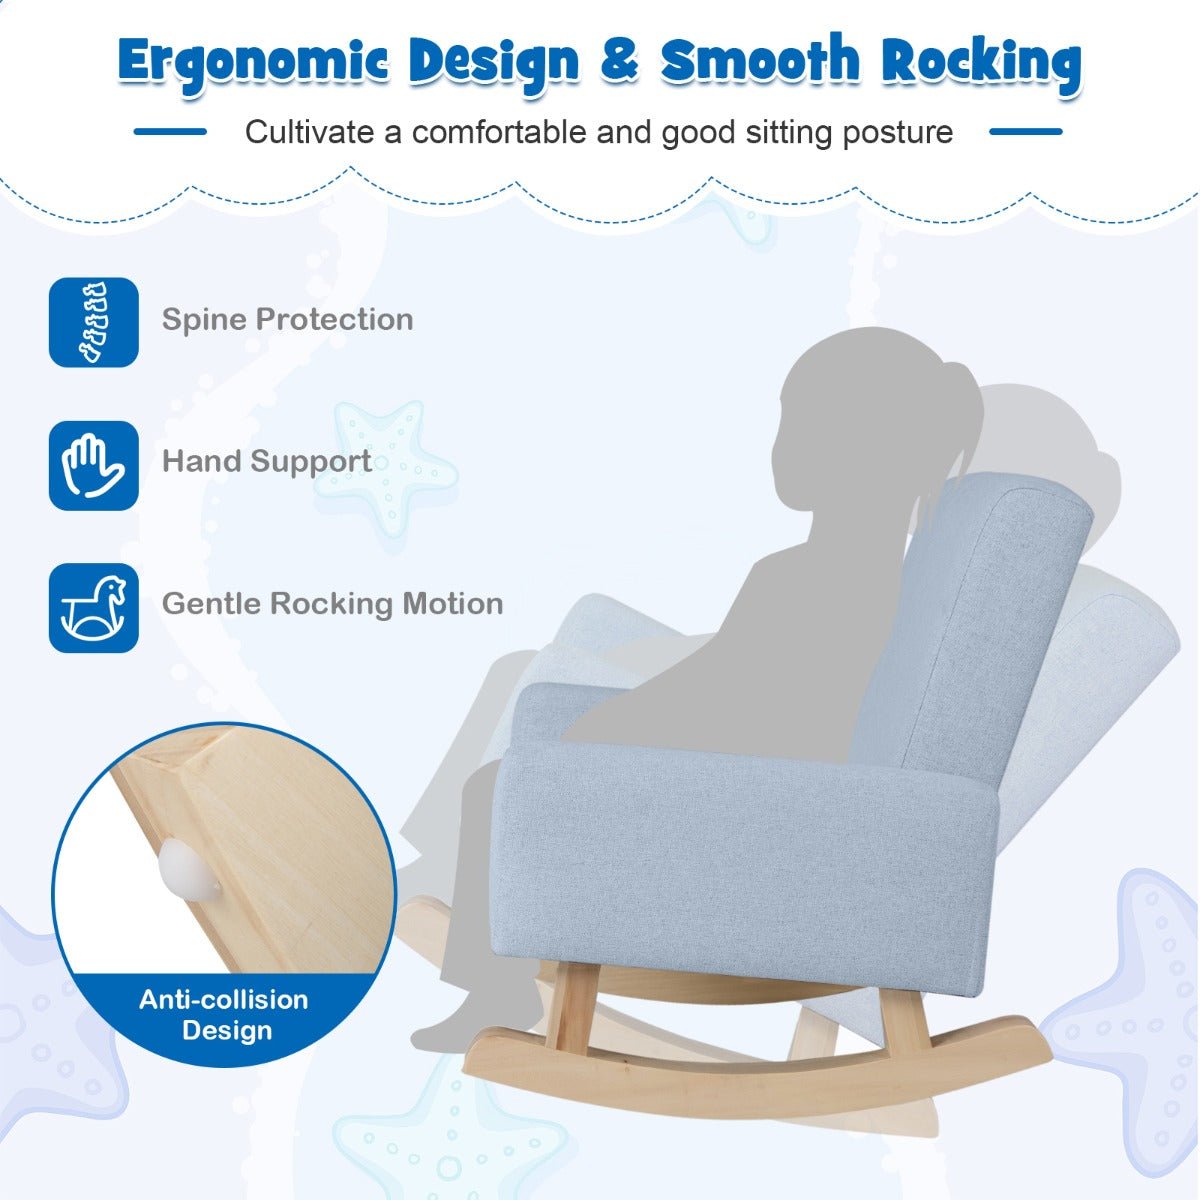 Kids Rocking Chair - Blue, Wood Legs, Anti-tipping Design for Relaxation